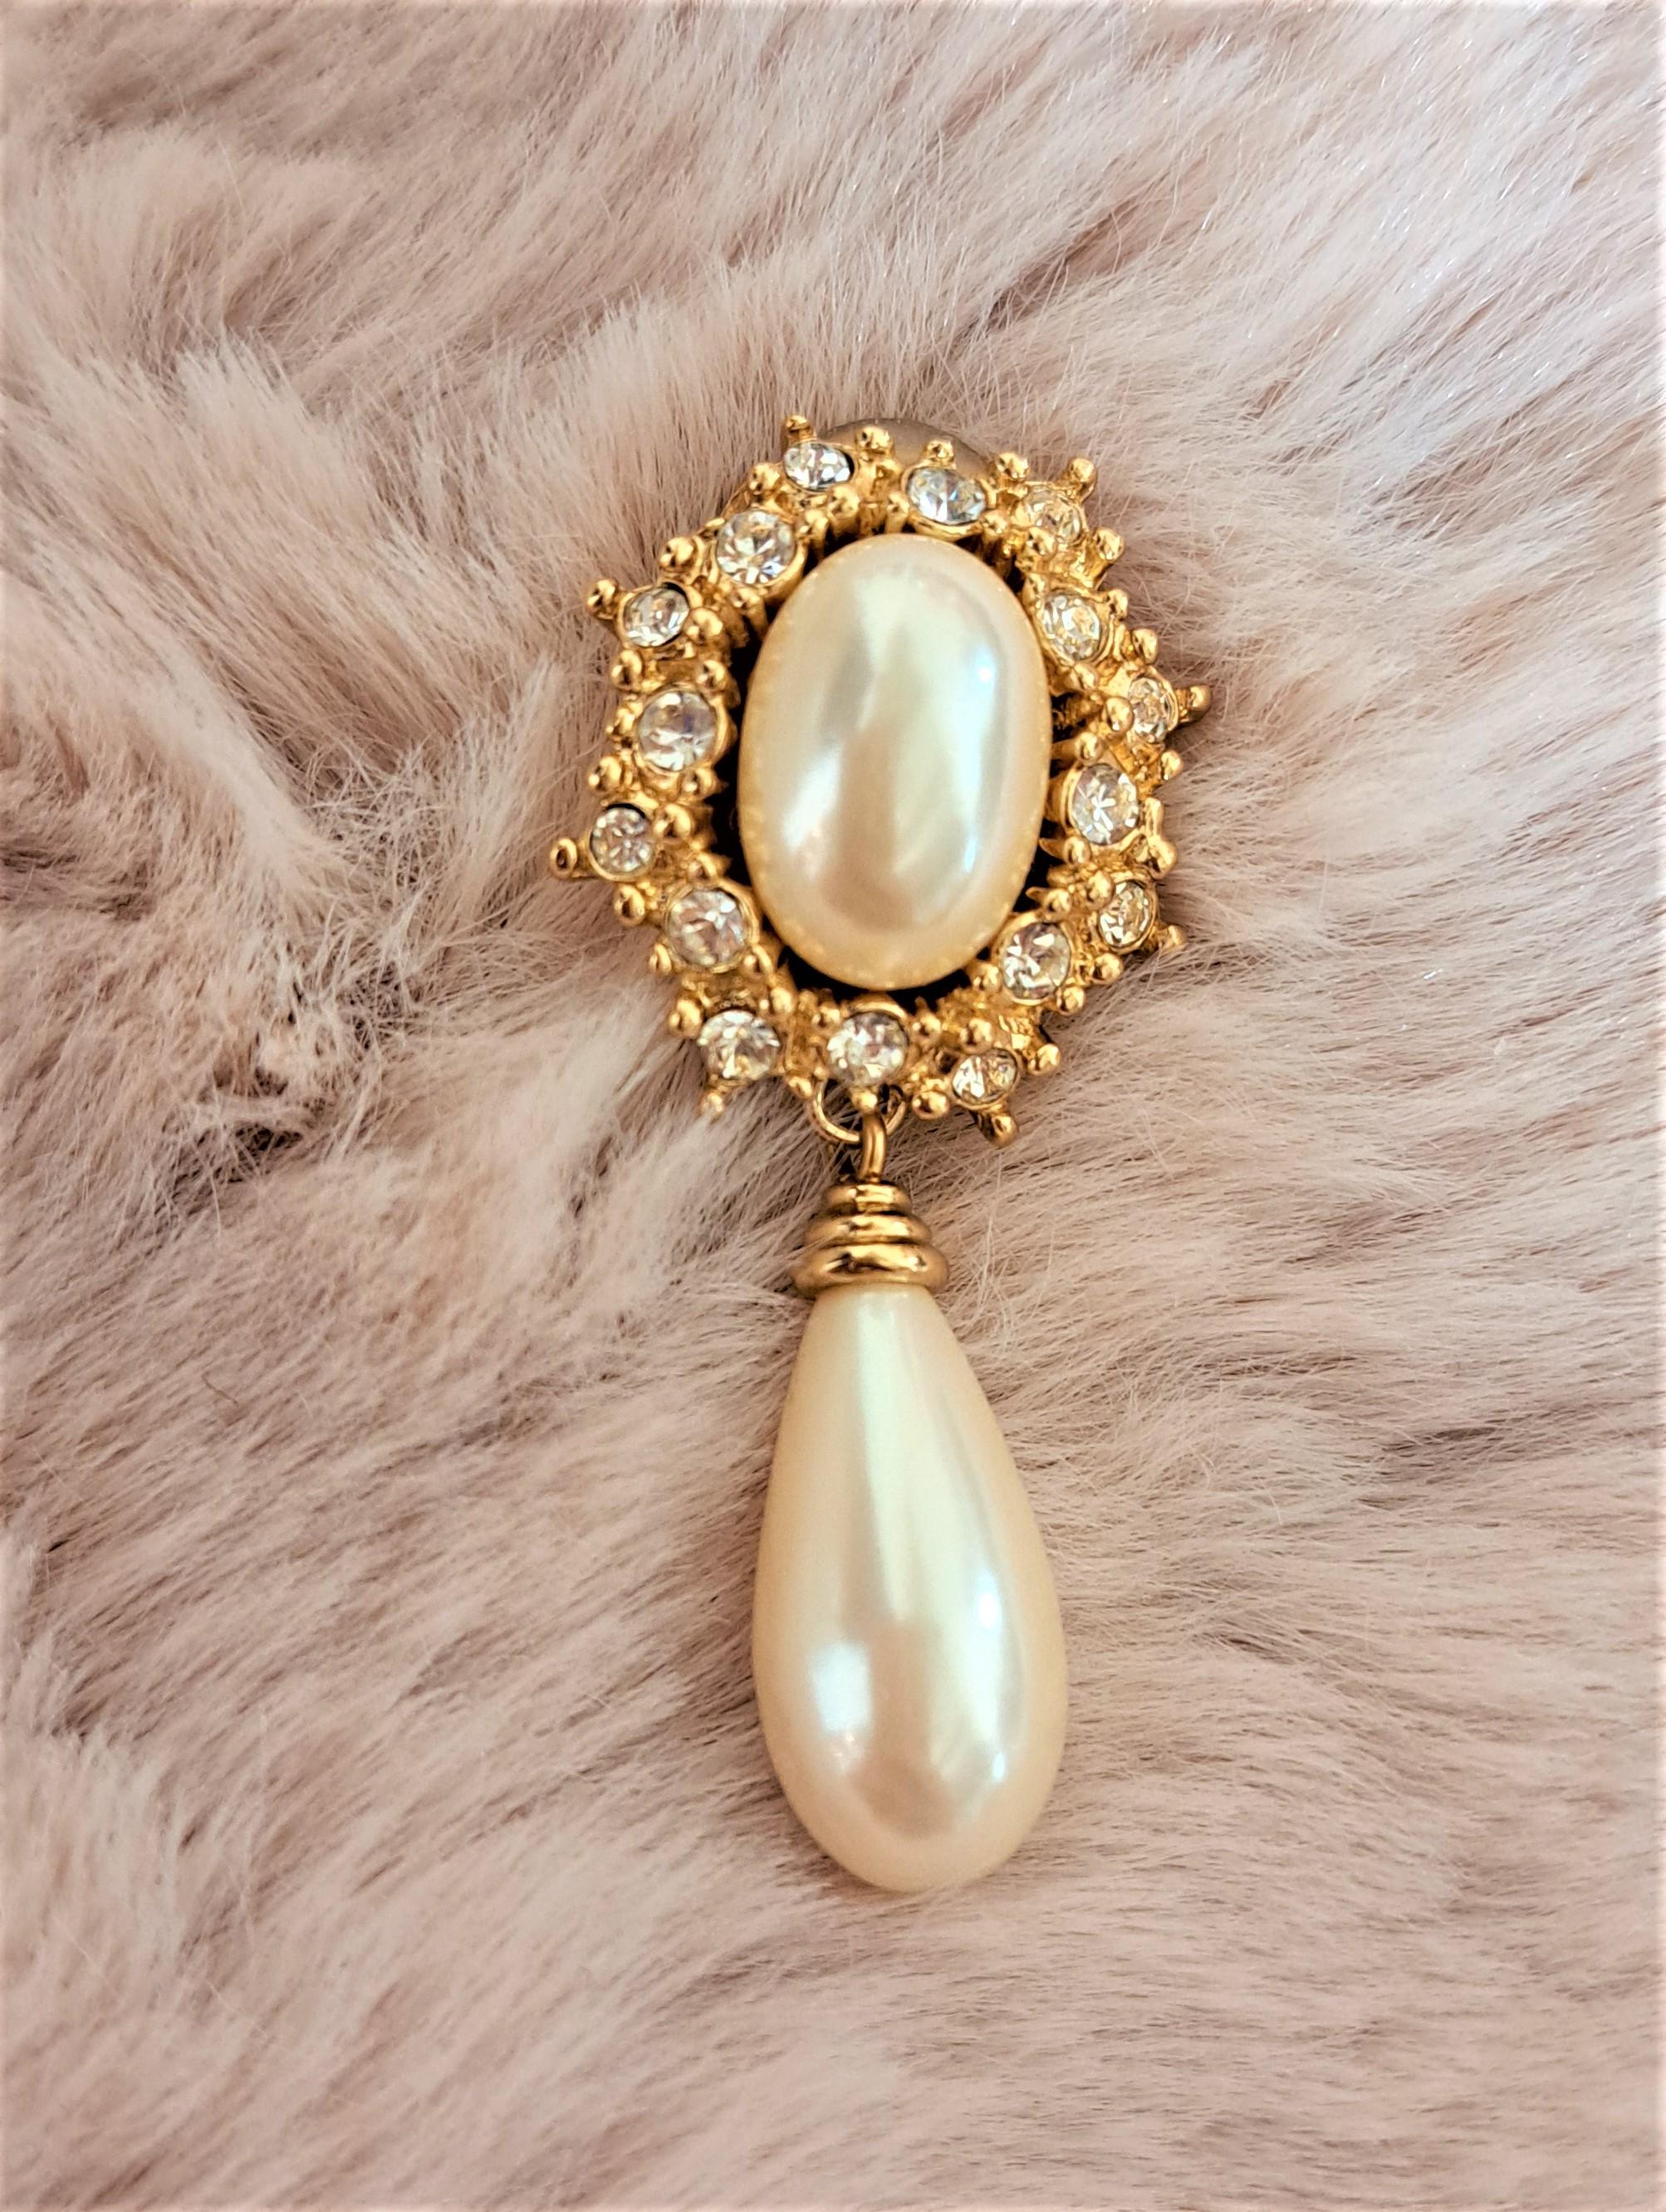 Christian Dior is a fashion brand that has been producing high-end fashion accessories for many decades. Vintage Christian Dior earrings with pearls and rhinestones are a classic and elegant addition to any jewelry collection.

Christian Dior